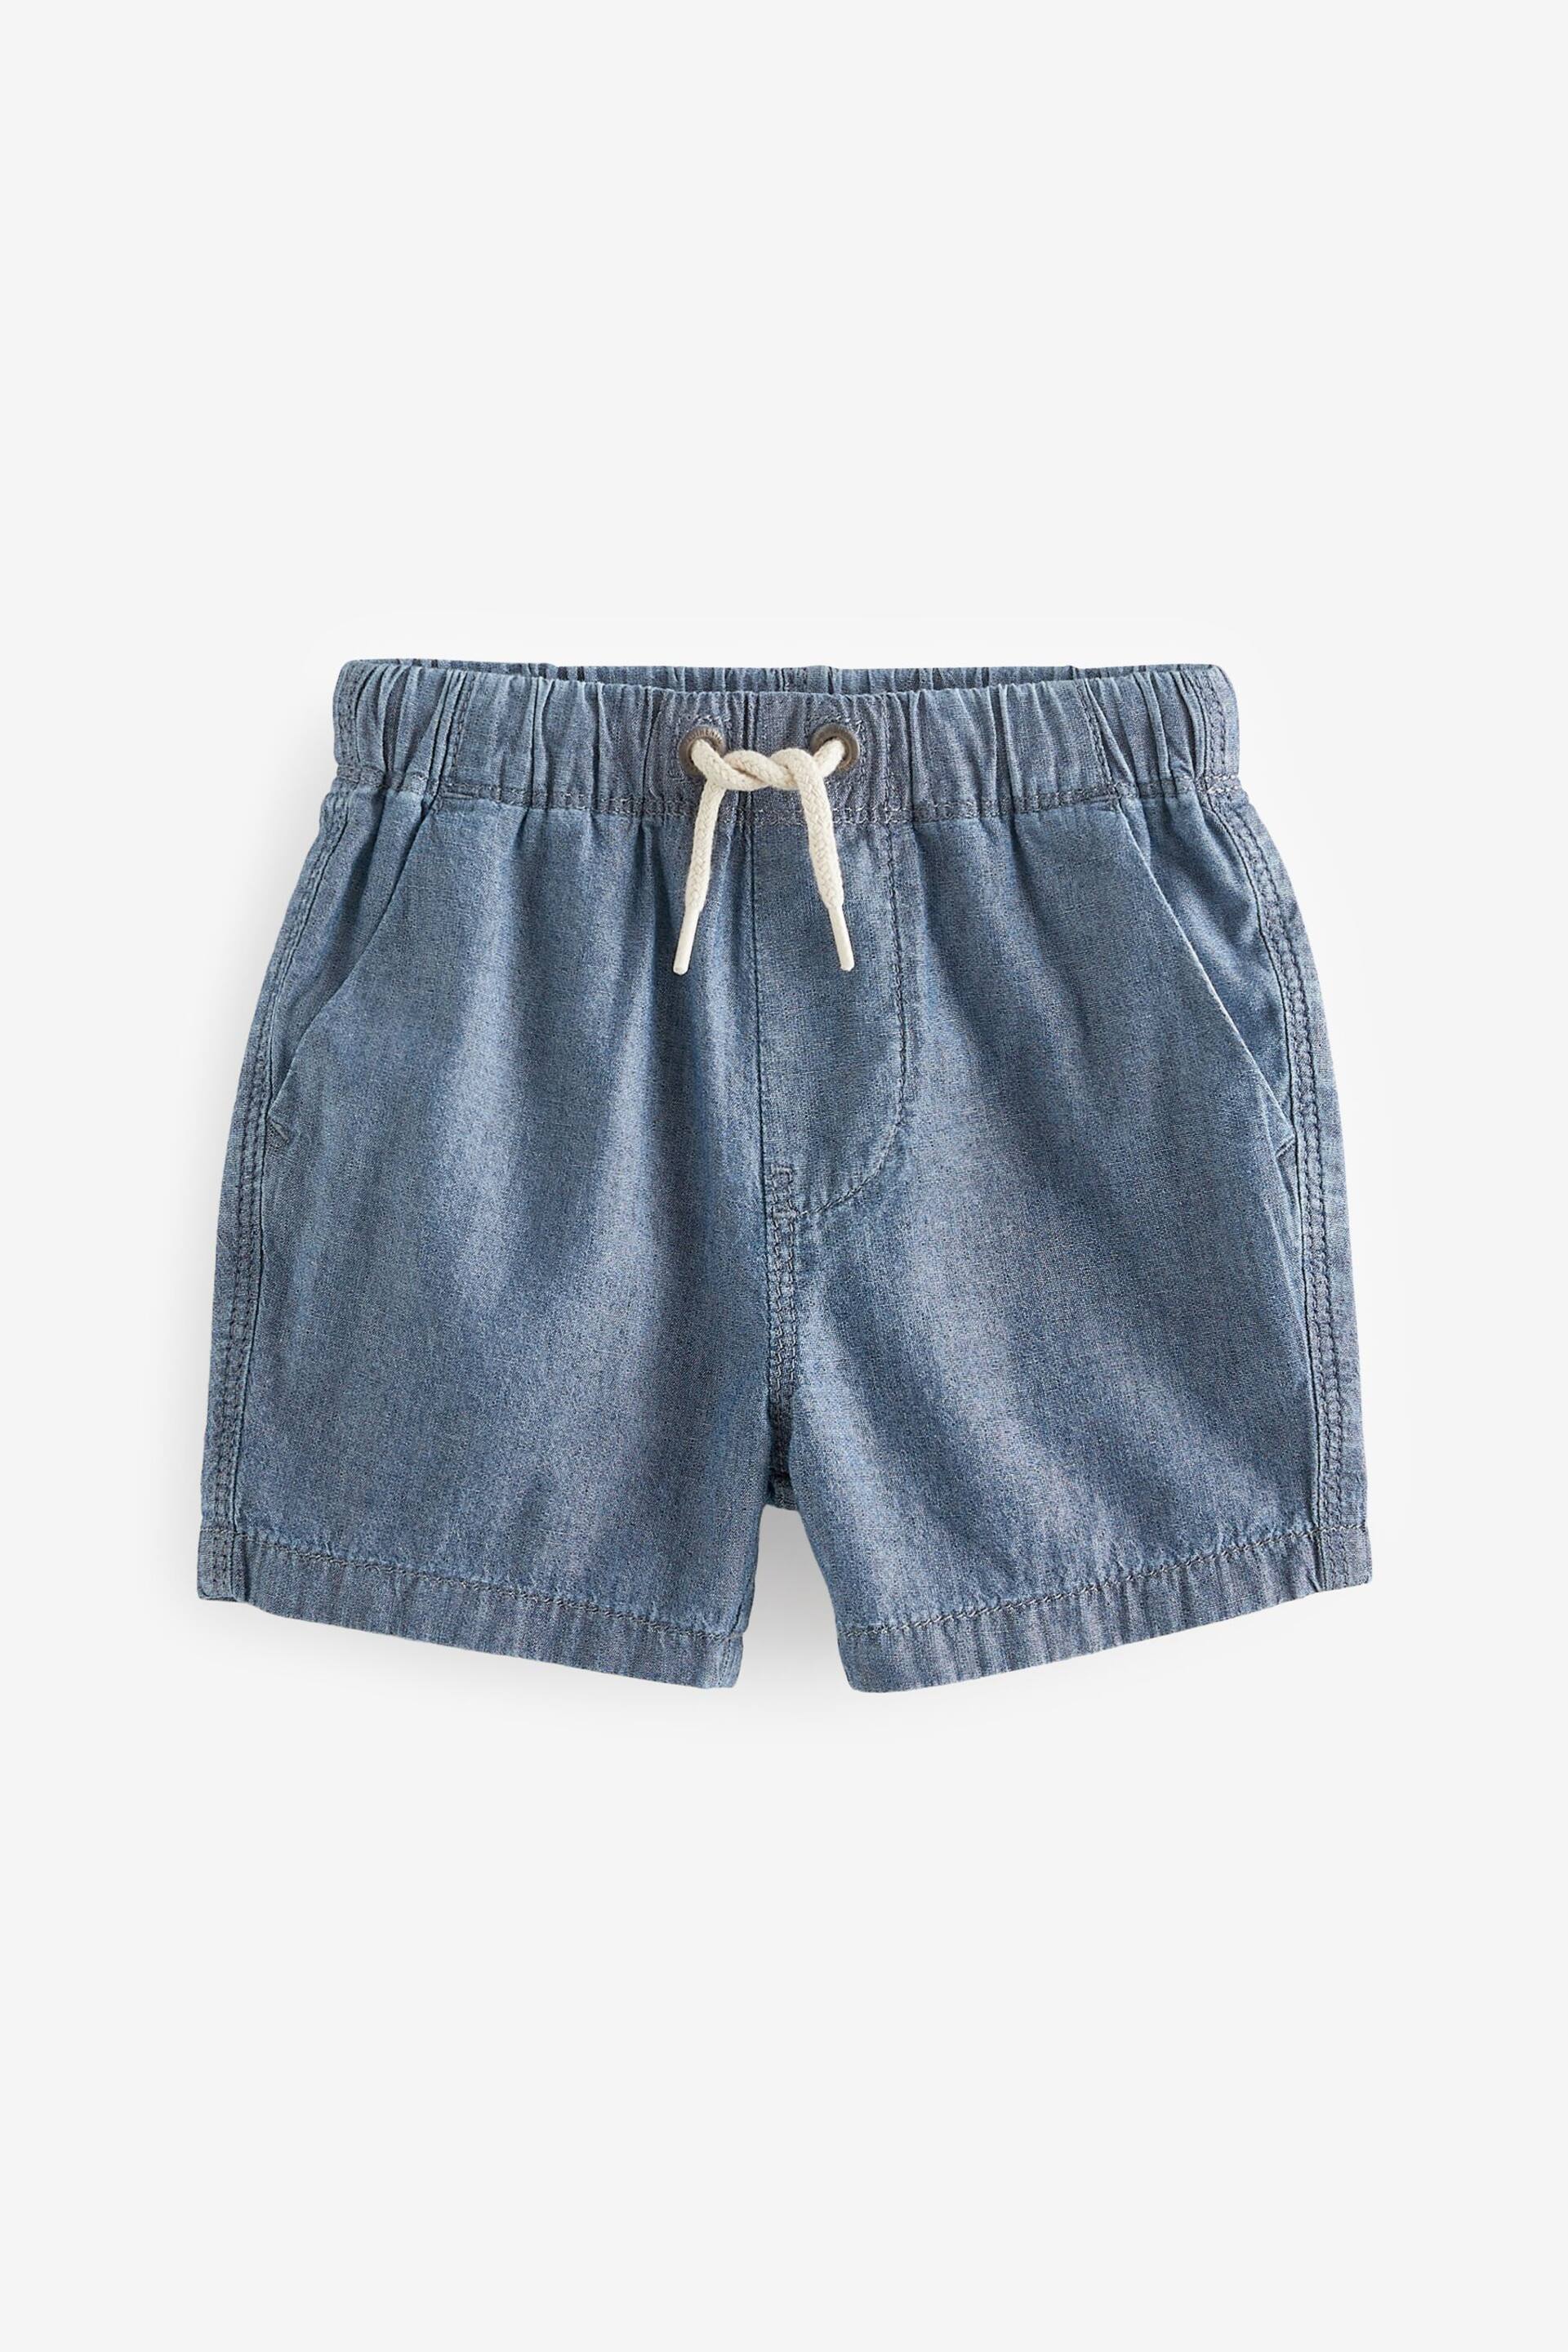 Blue Chambray Pull-On Shorts (3mths-7yrs) - Image 4 of 6